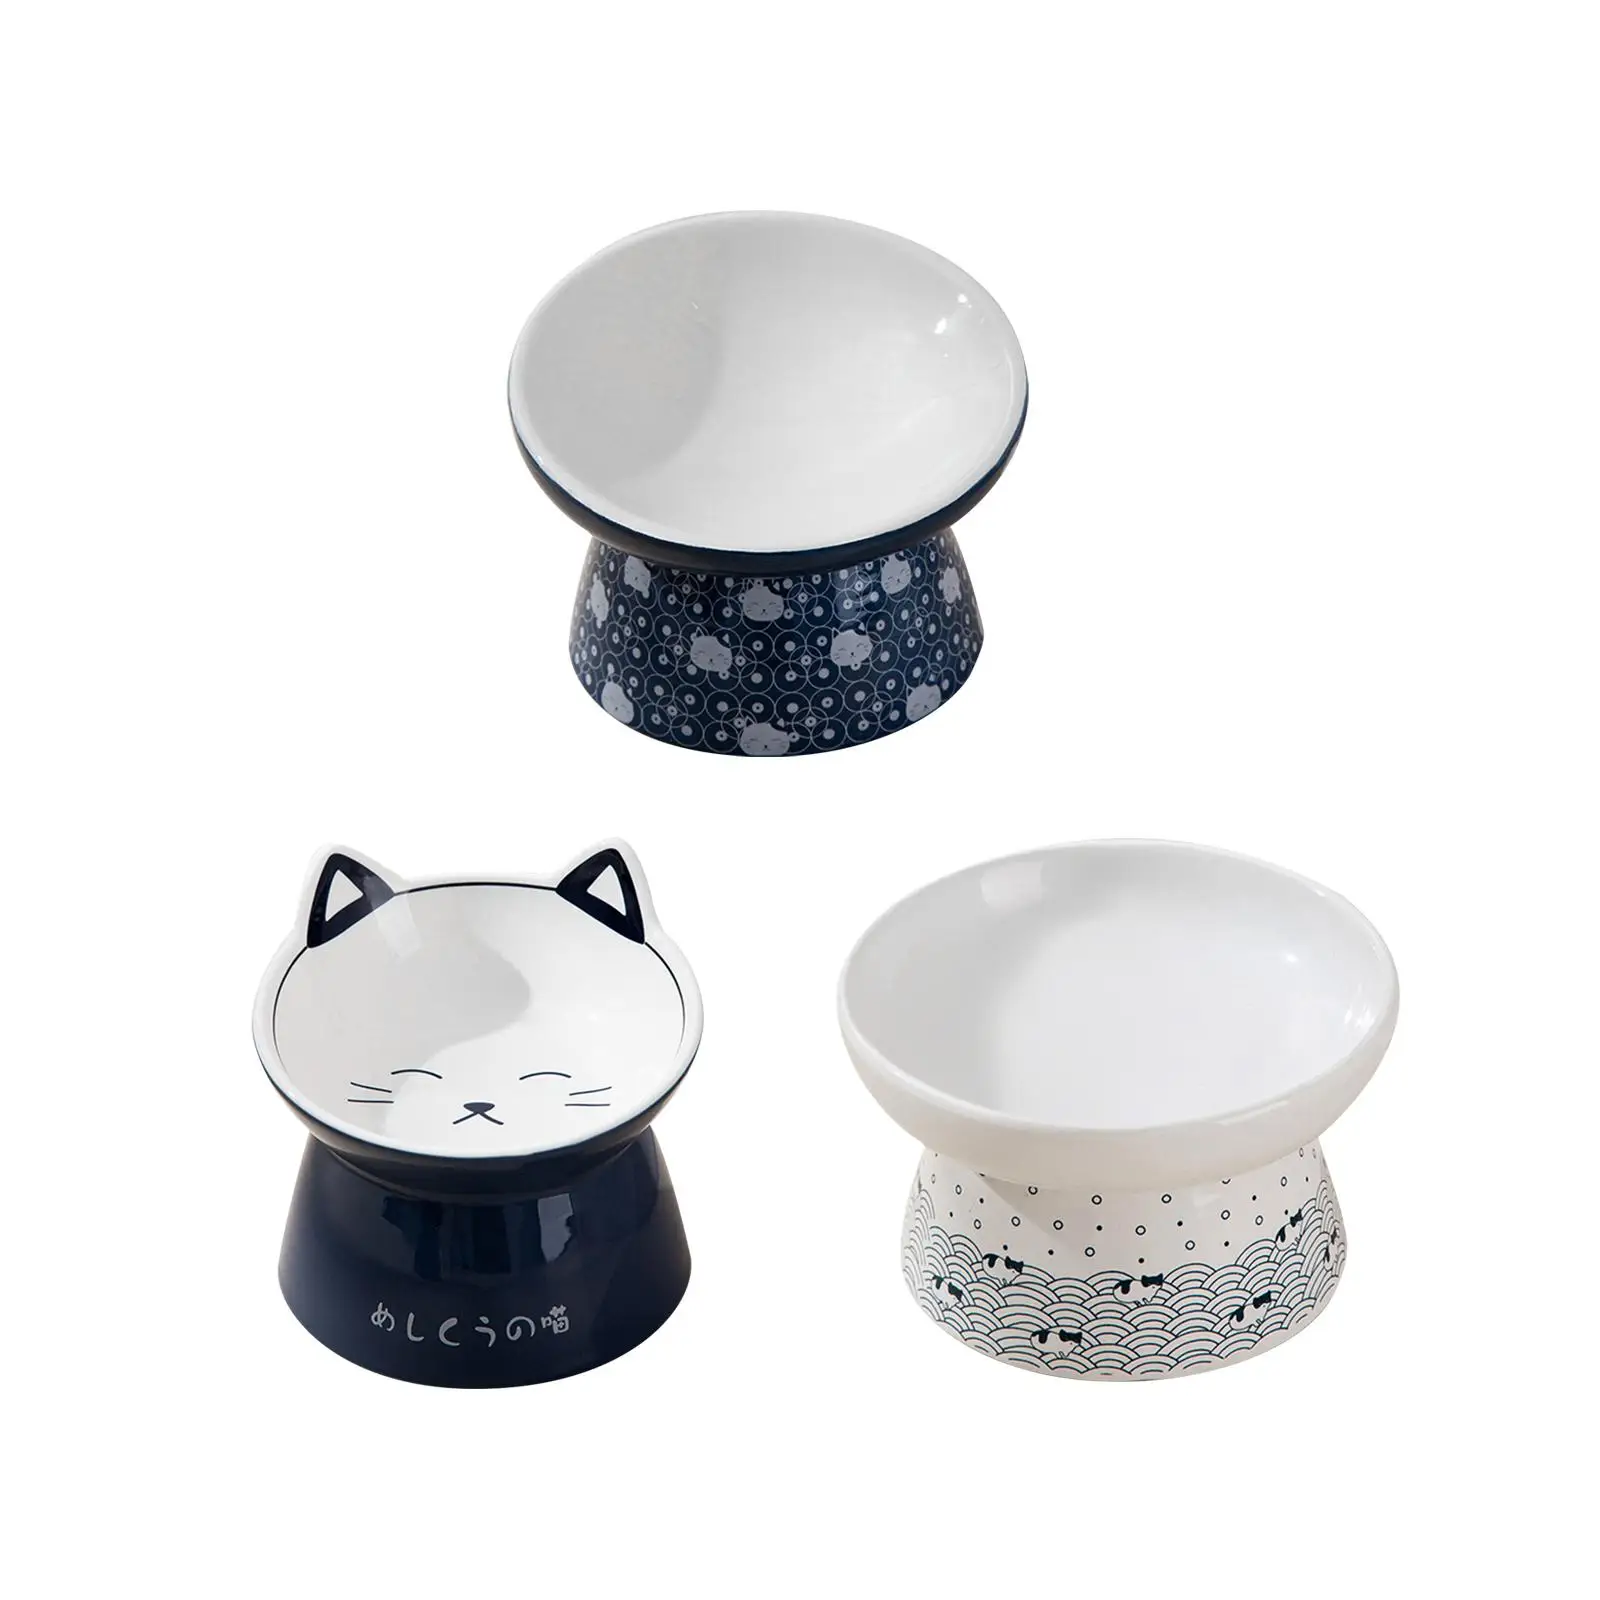 Ceramic Elevated Cat Feeder Bowl Dish Accessory Durable Porcelain Bowl